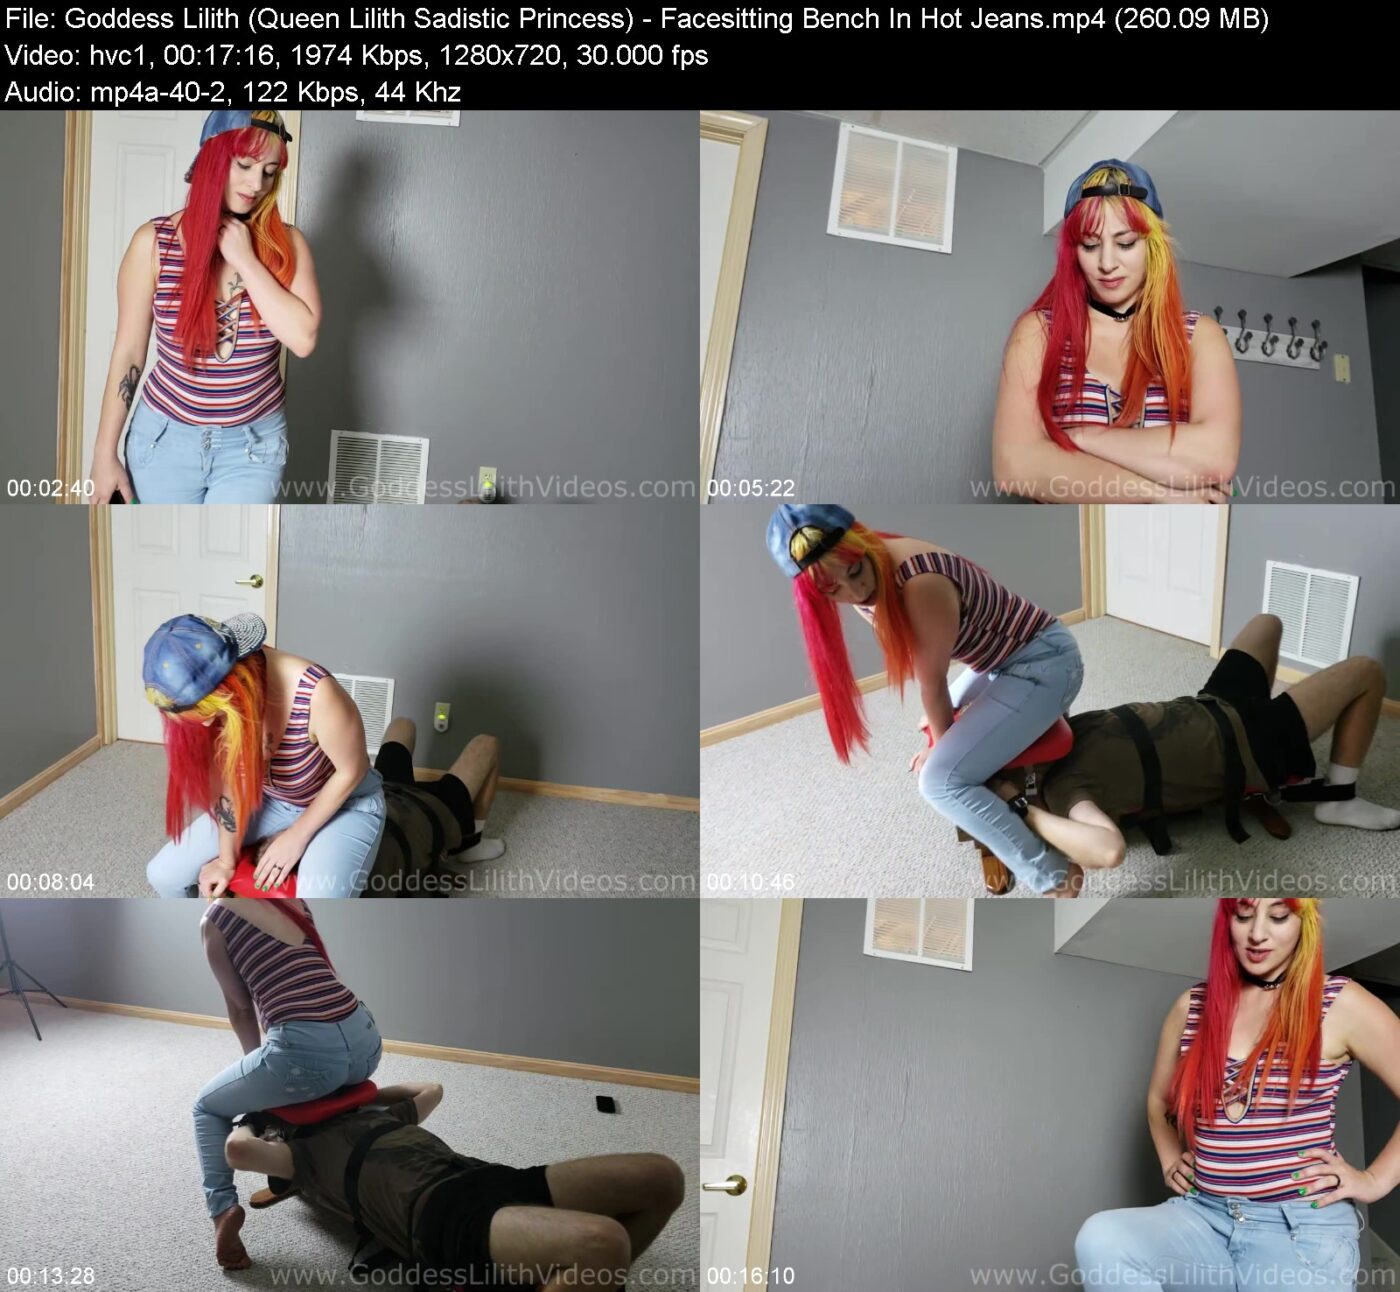 Goddess Lilith (Queen Lilith Sadistic Princess) - Facesitting Bench In Hot Jeans